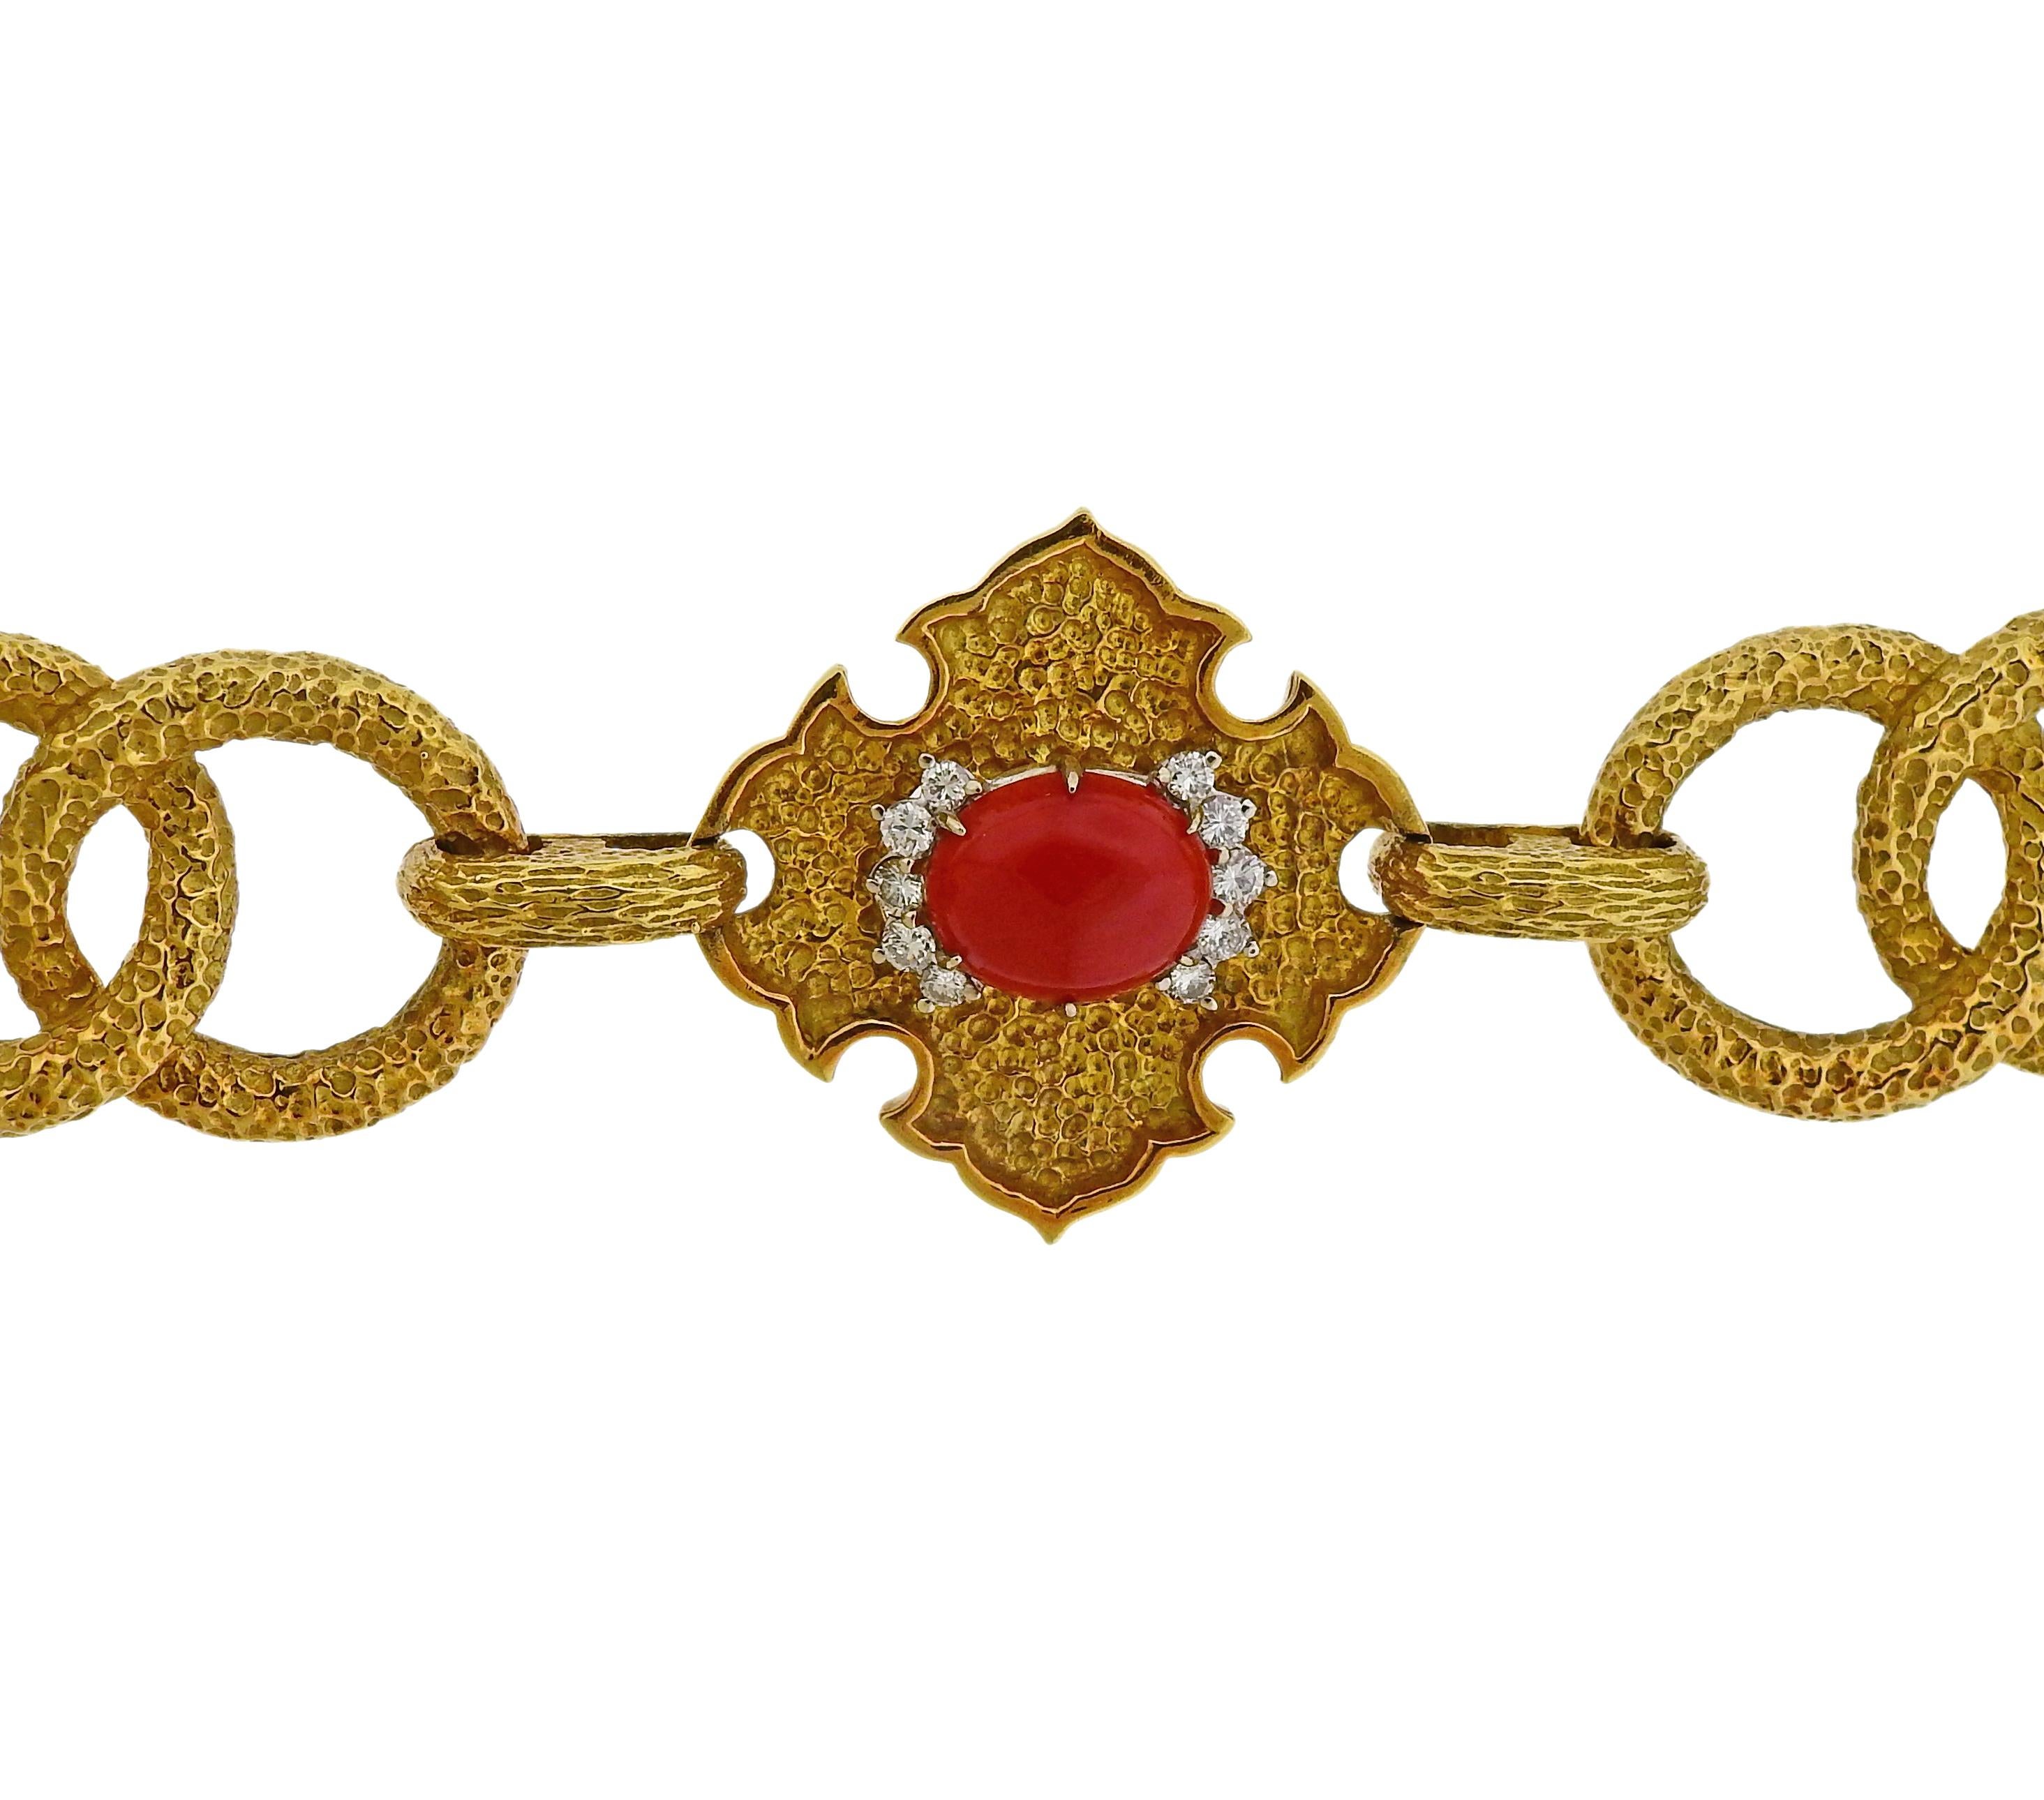 Vintage 18k gold necklace by R. Stone, set with corals, onyx and approx. 2.50ctw in diamonds. The necklace is 26